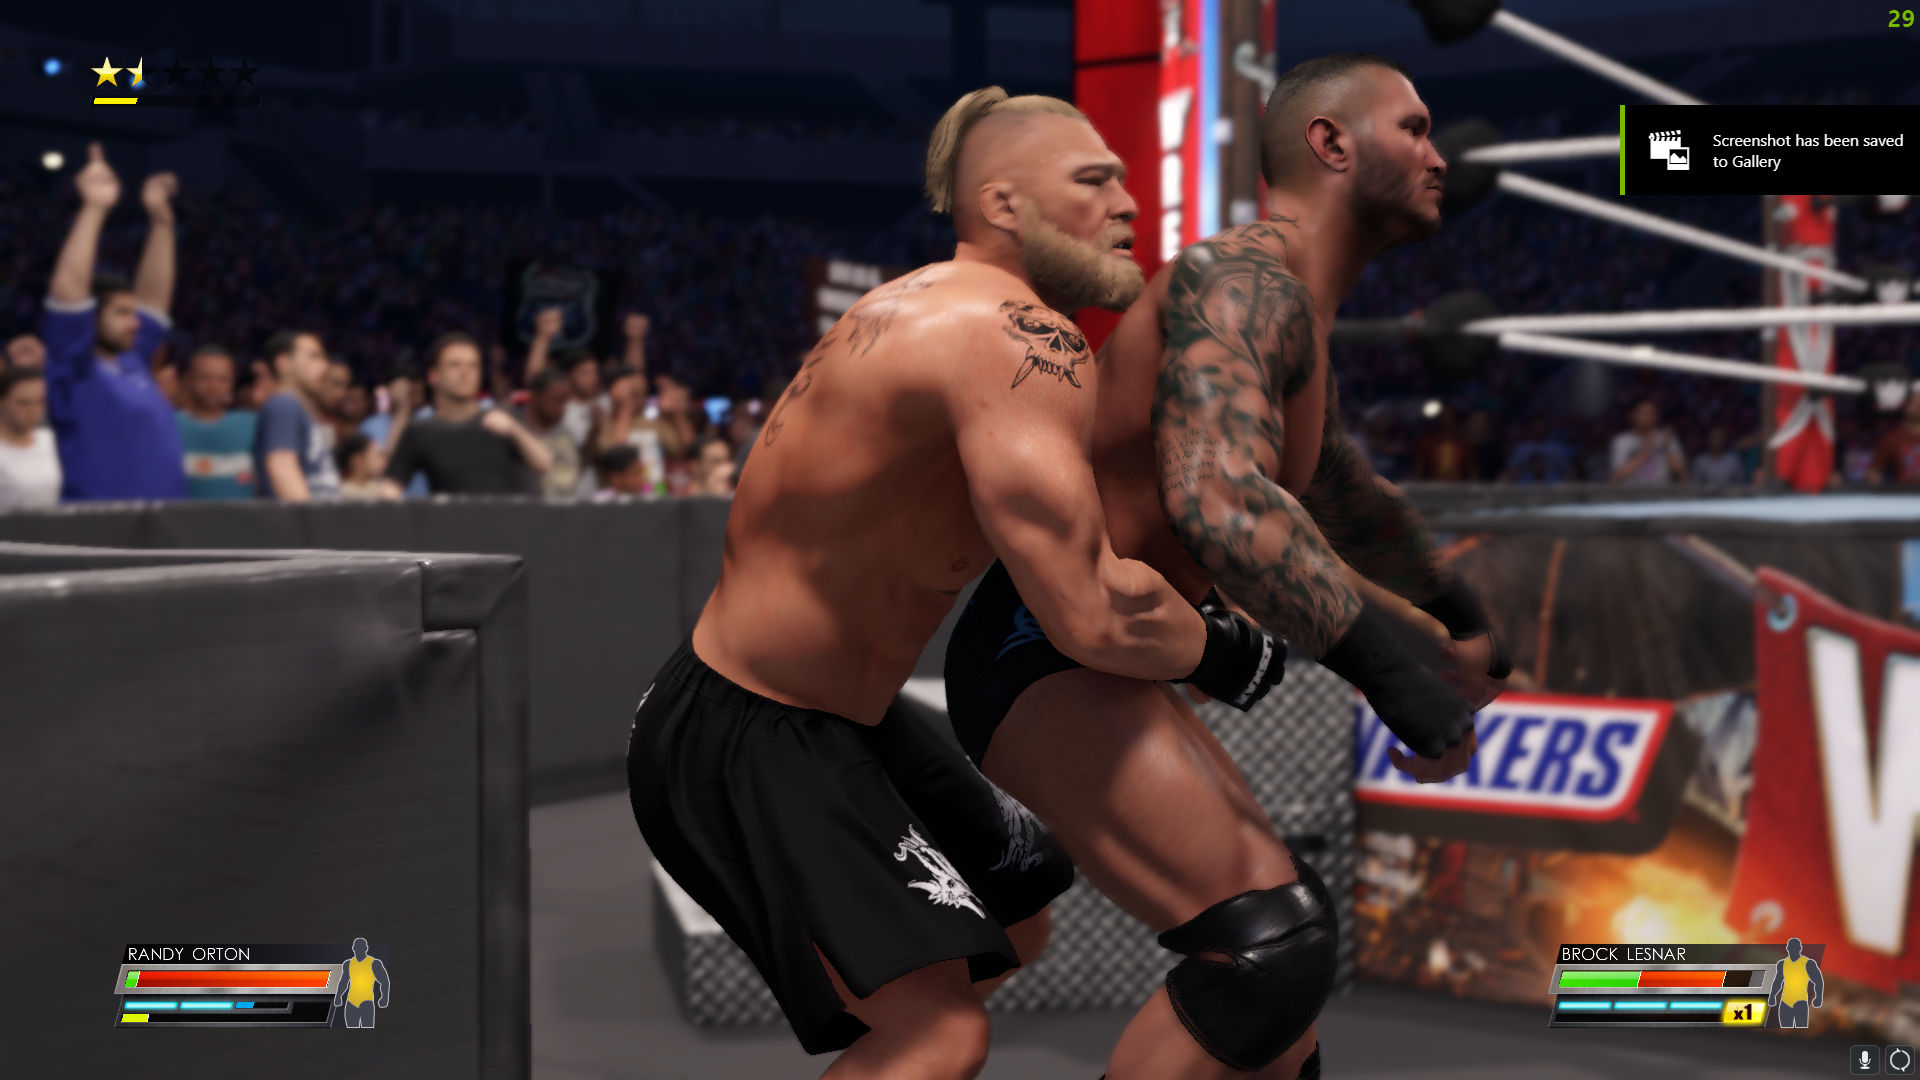 WWE 2K22 (PC) Review: Hits Different, But Only Slightly So - MySmartPrice